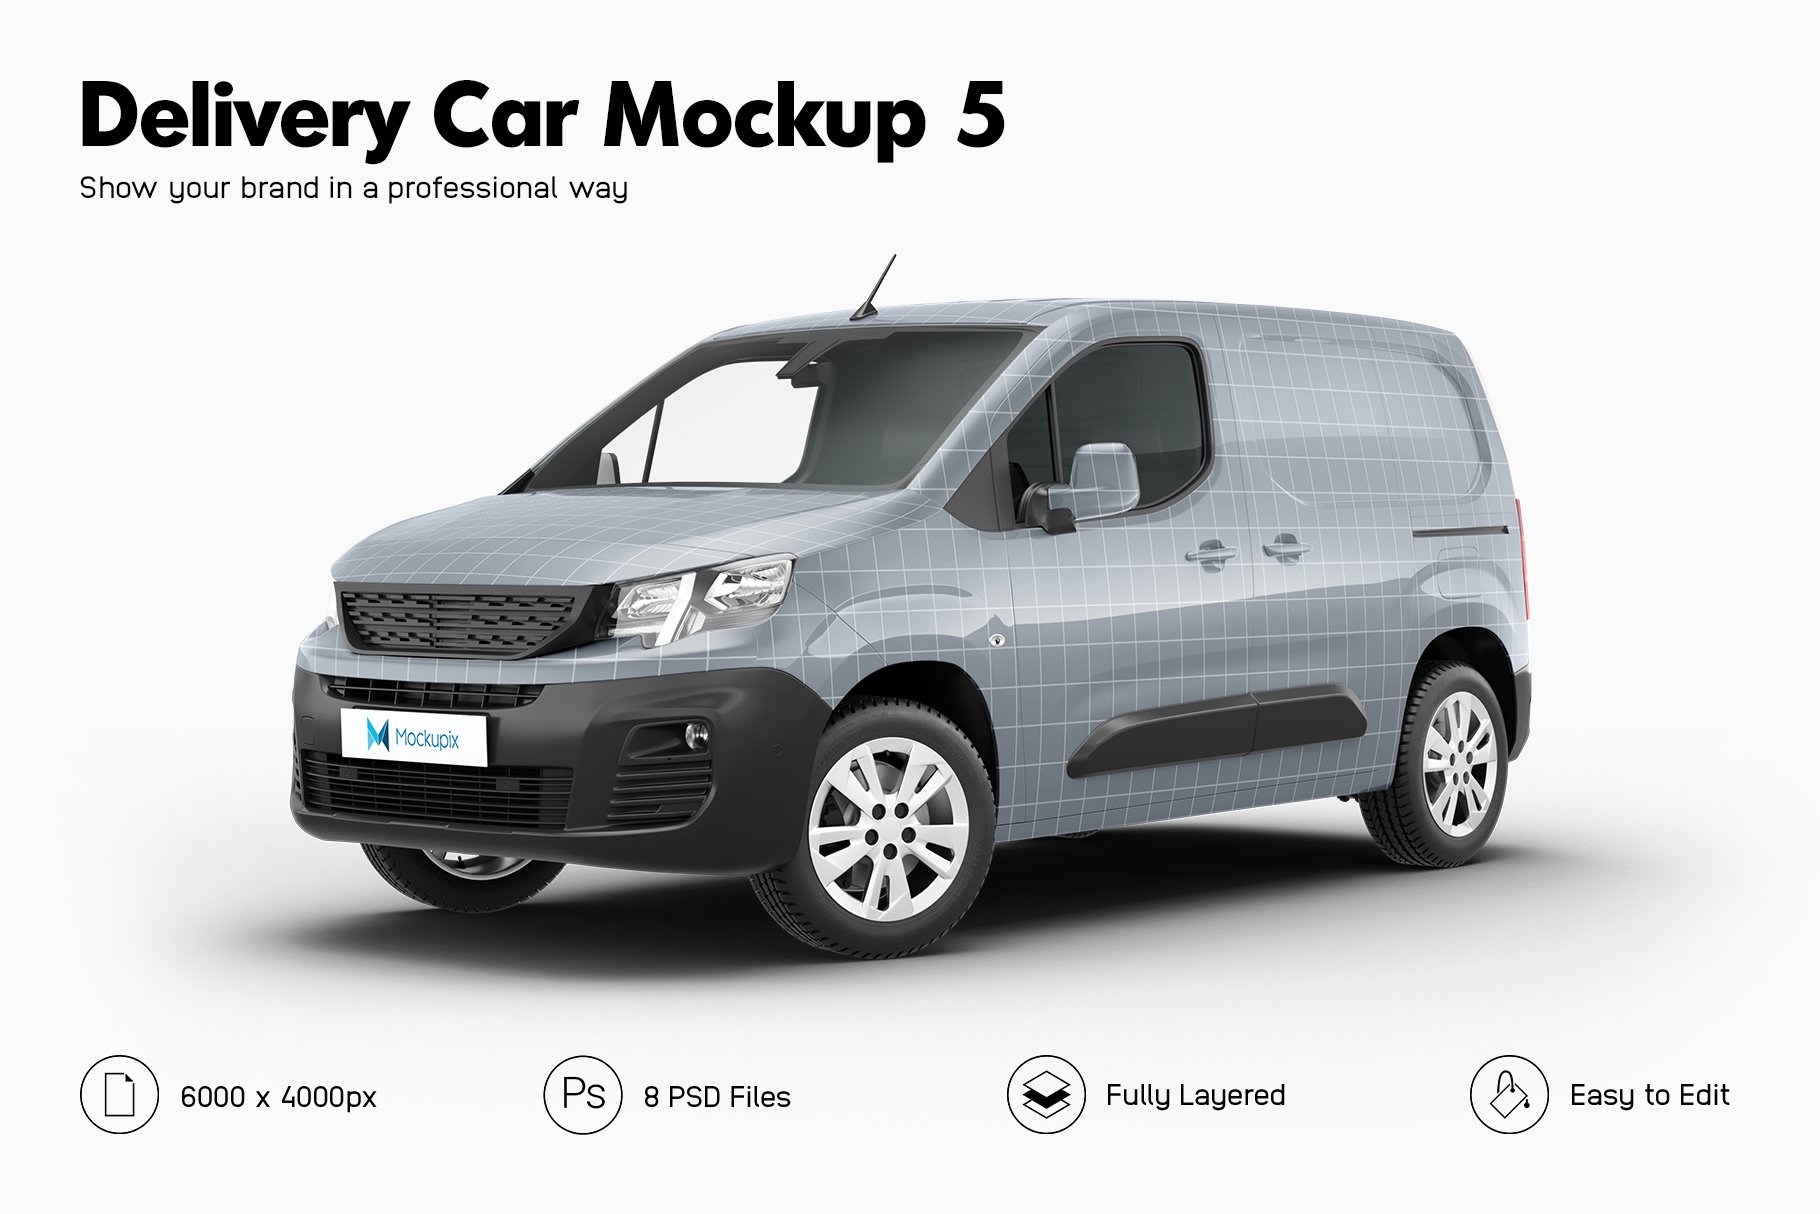 Delivery Car Mockup 5 cover image.